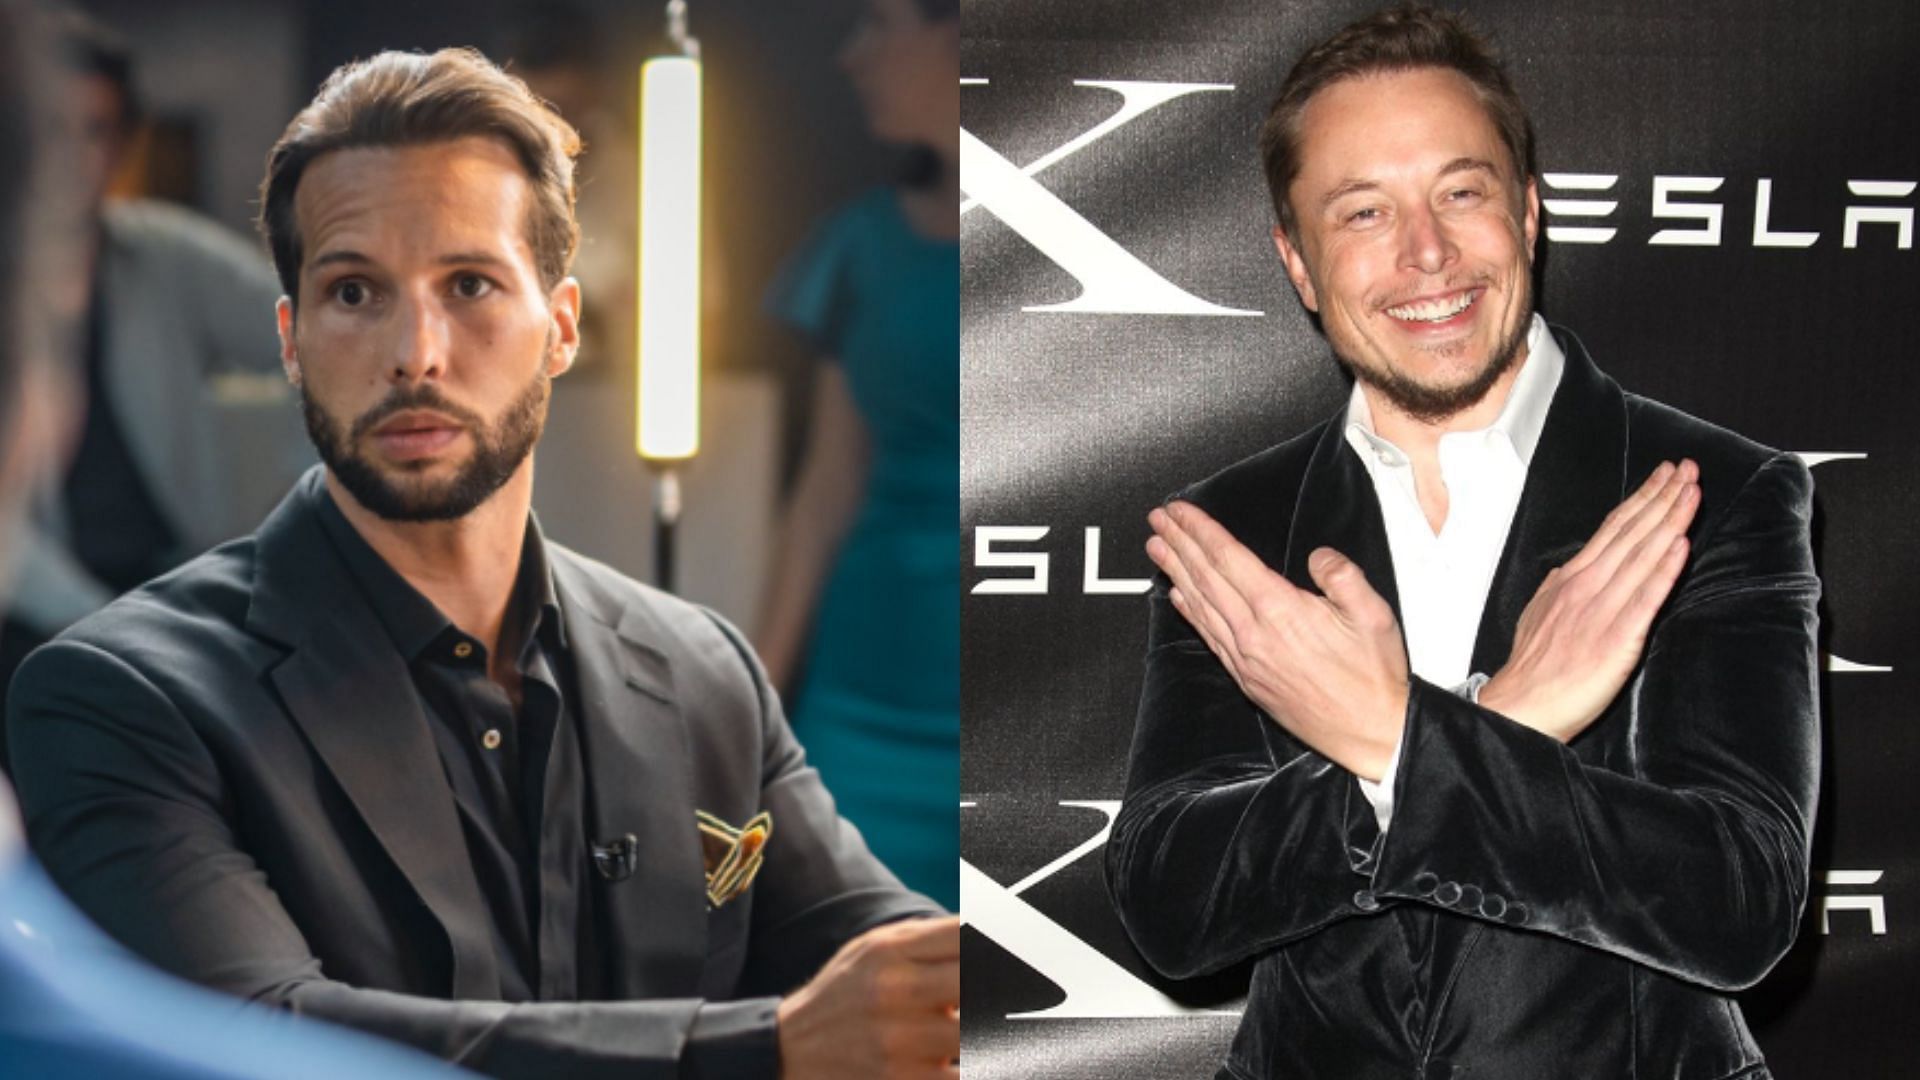 Tristan Tate (left), Elon Musk (right) [Images courtesy of @elonmusk &amp; @tristanthetalisman on Twitter]